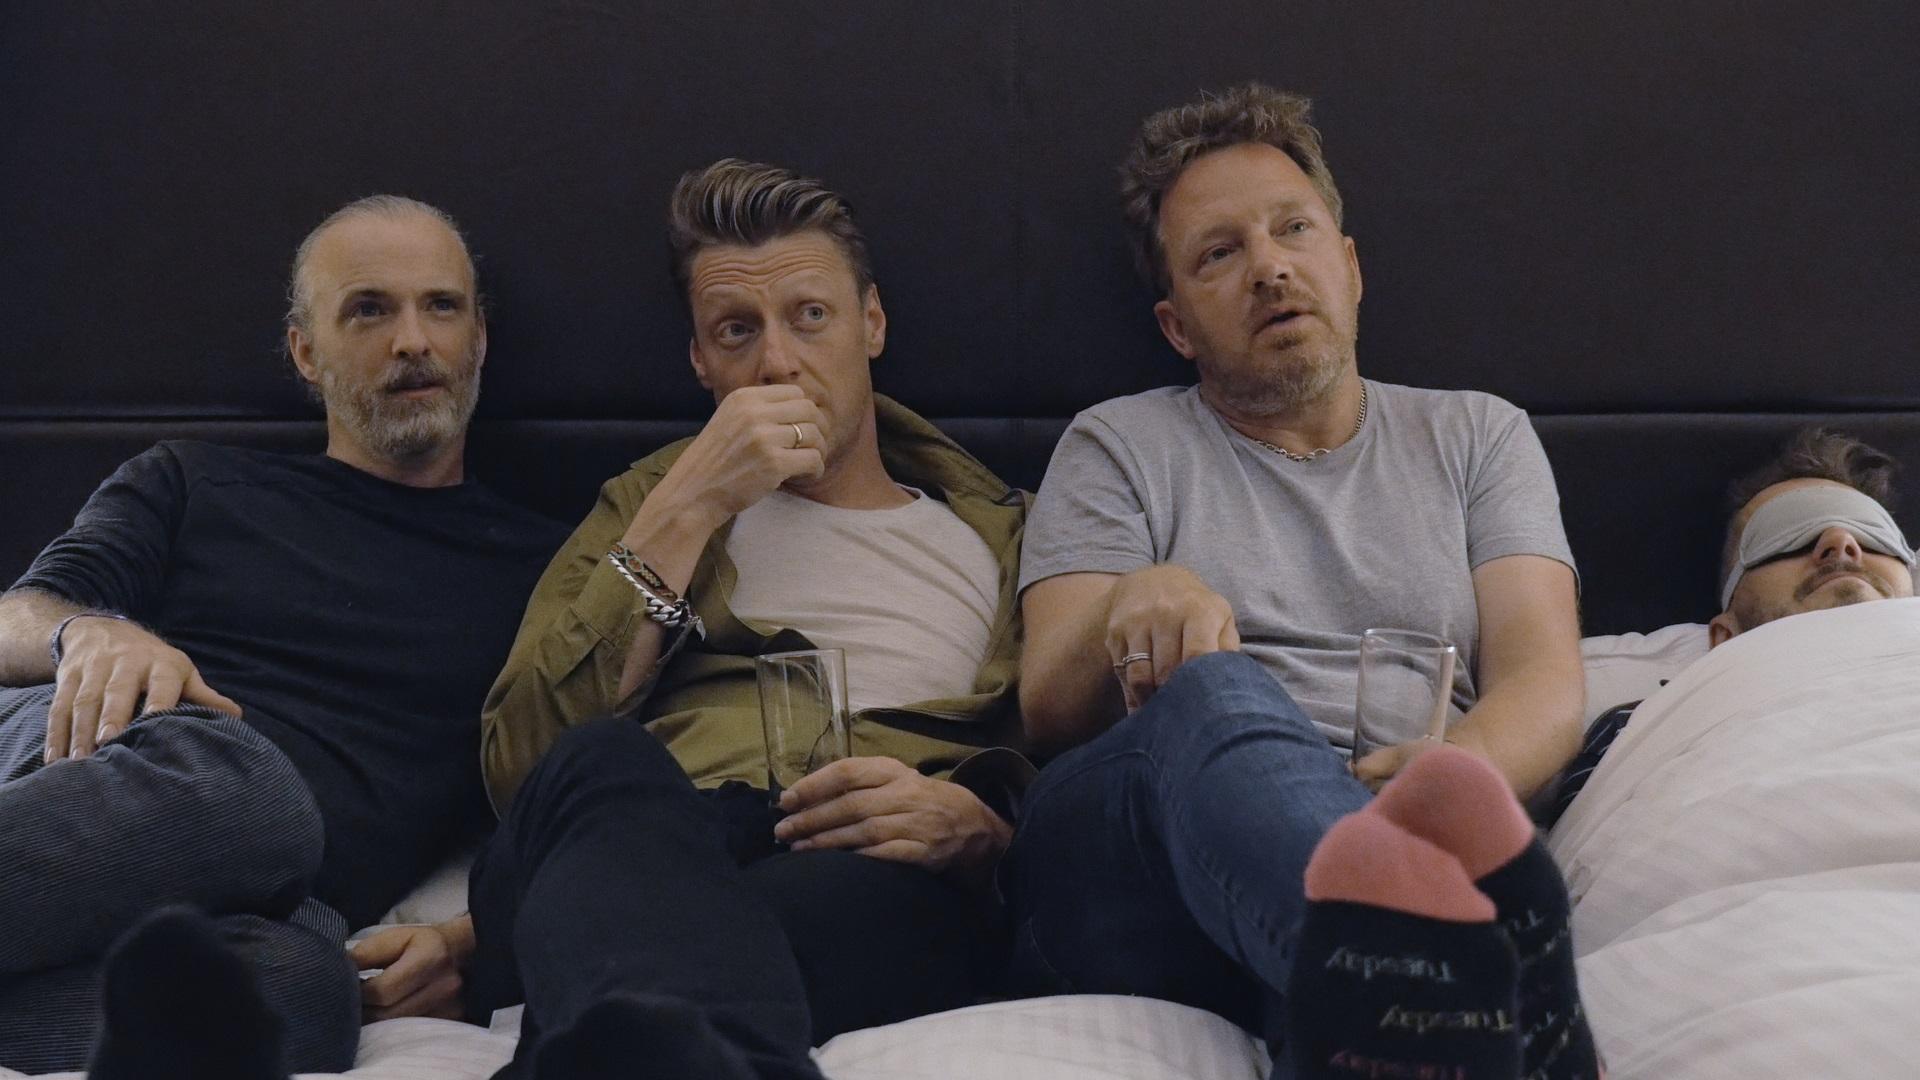 Four in a bed: the Scottish rockers get personal in this surprisingly enlightening documentary